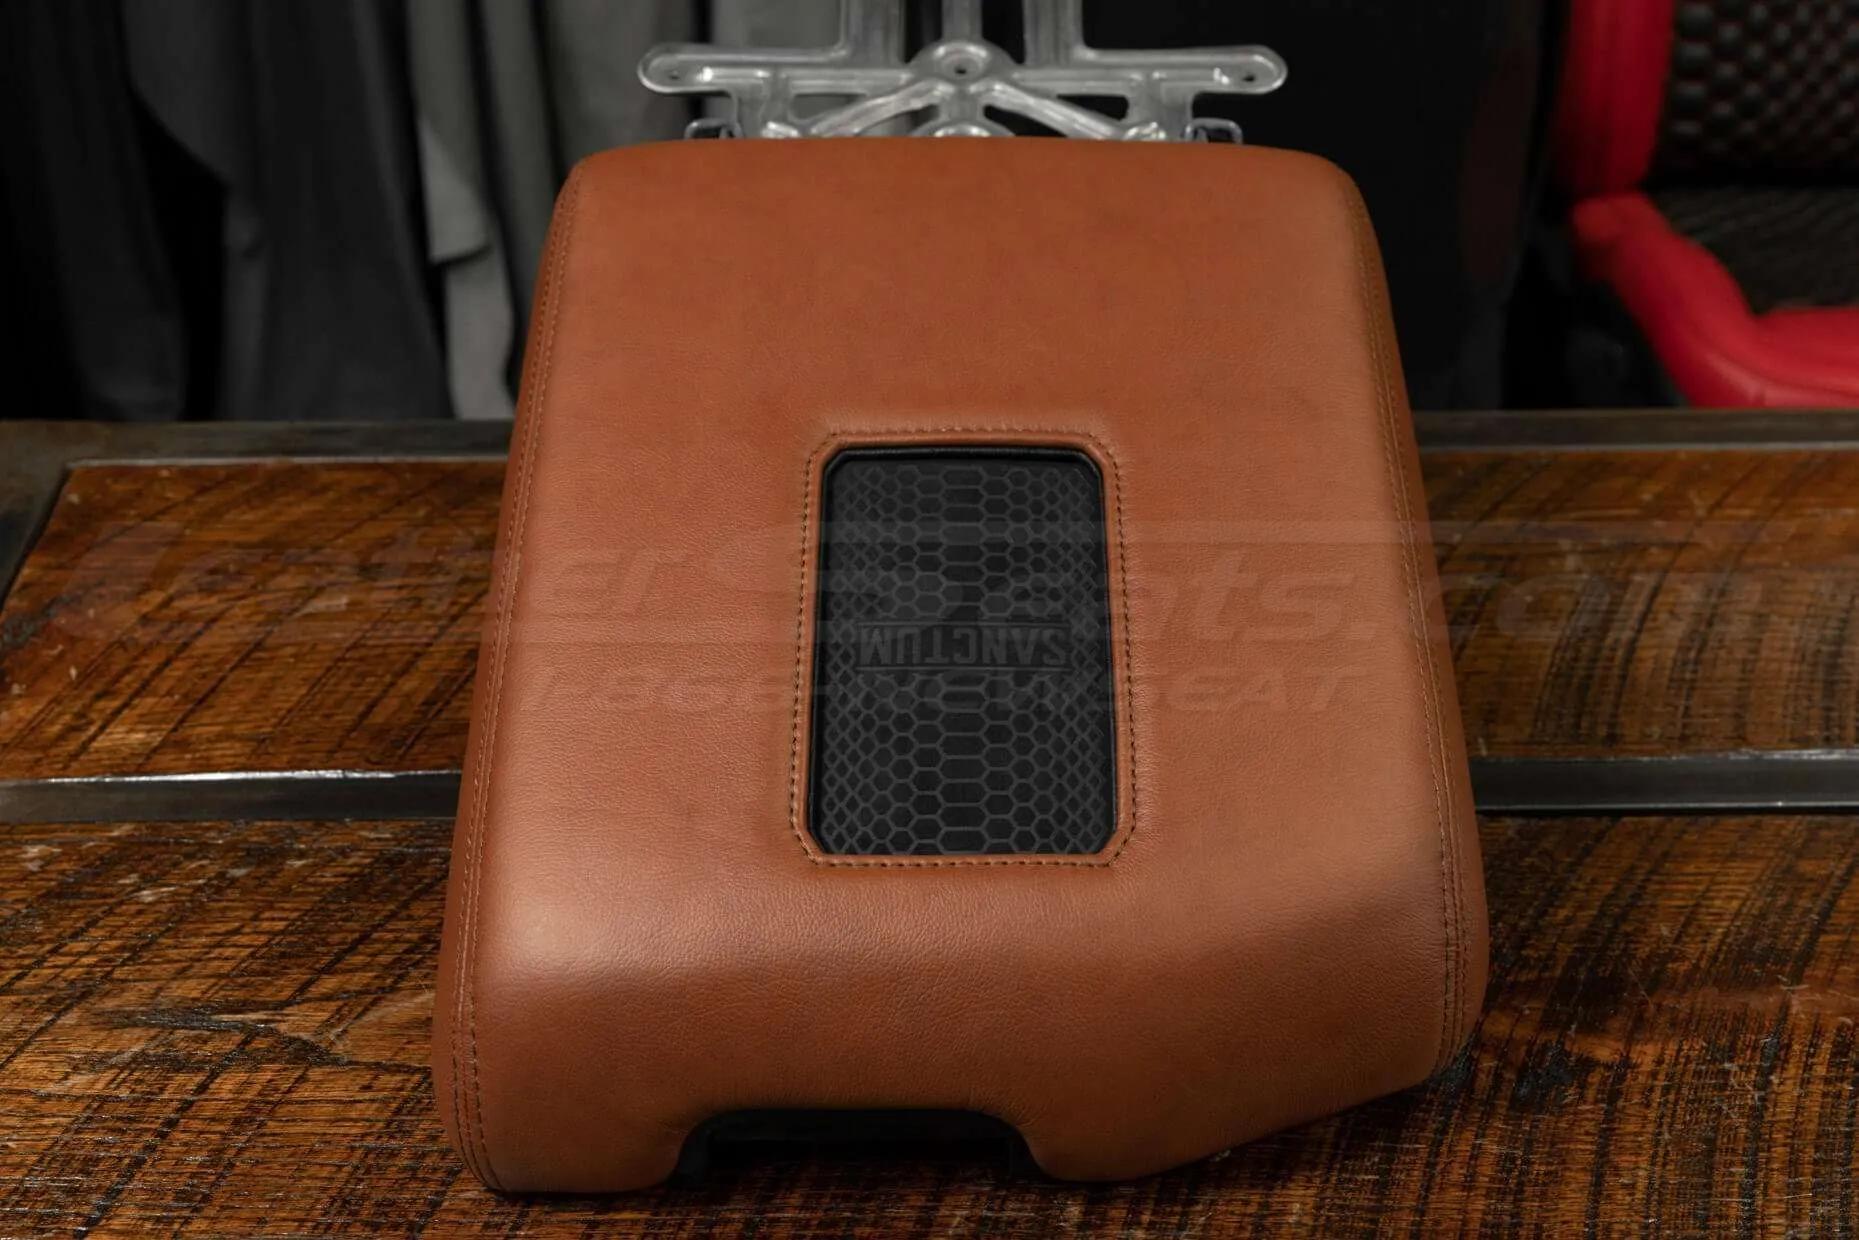 Toyota Sequoia Sanctum Wireless Charging Console in Chocolate leather